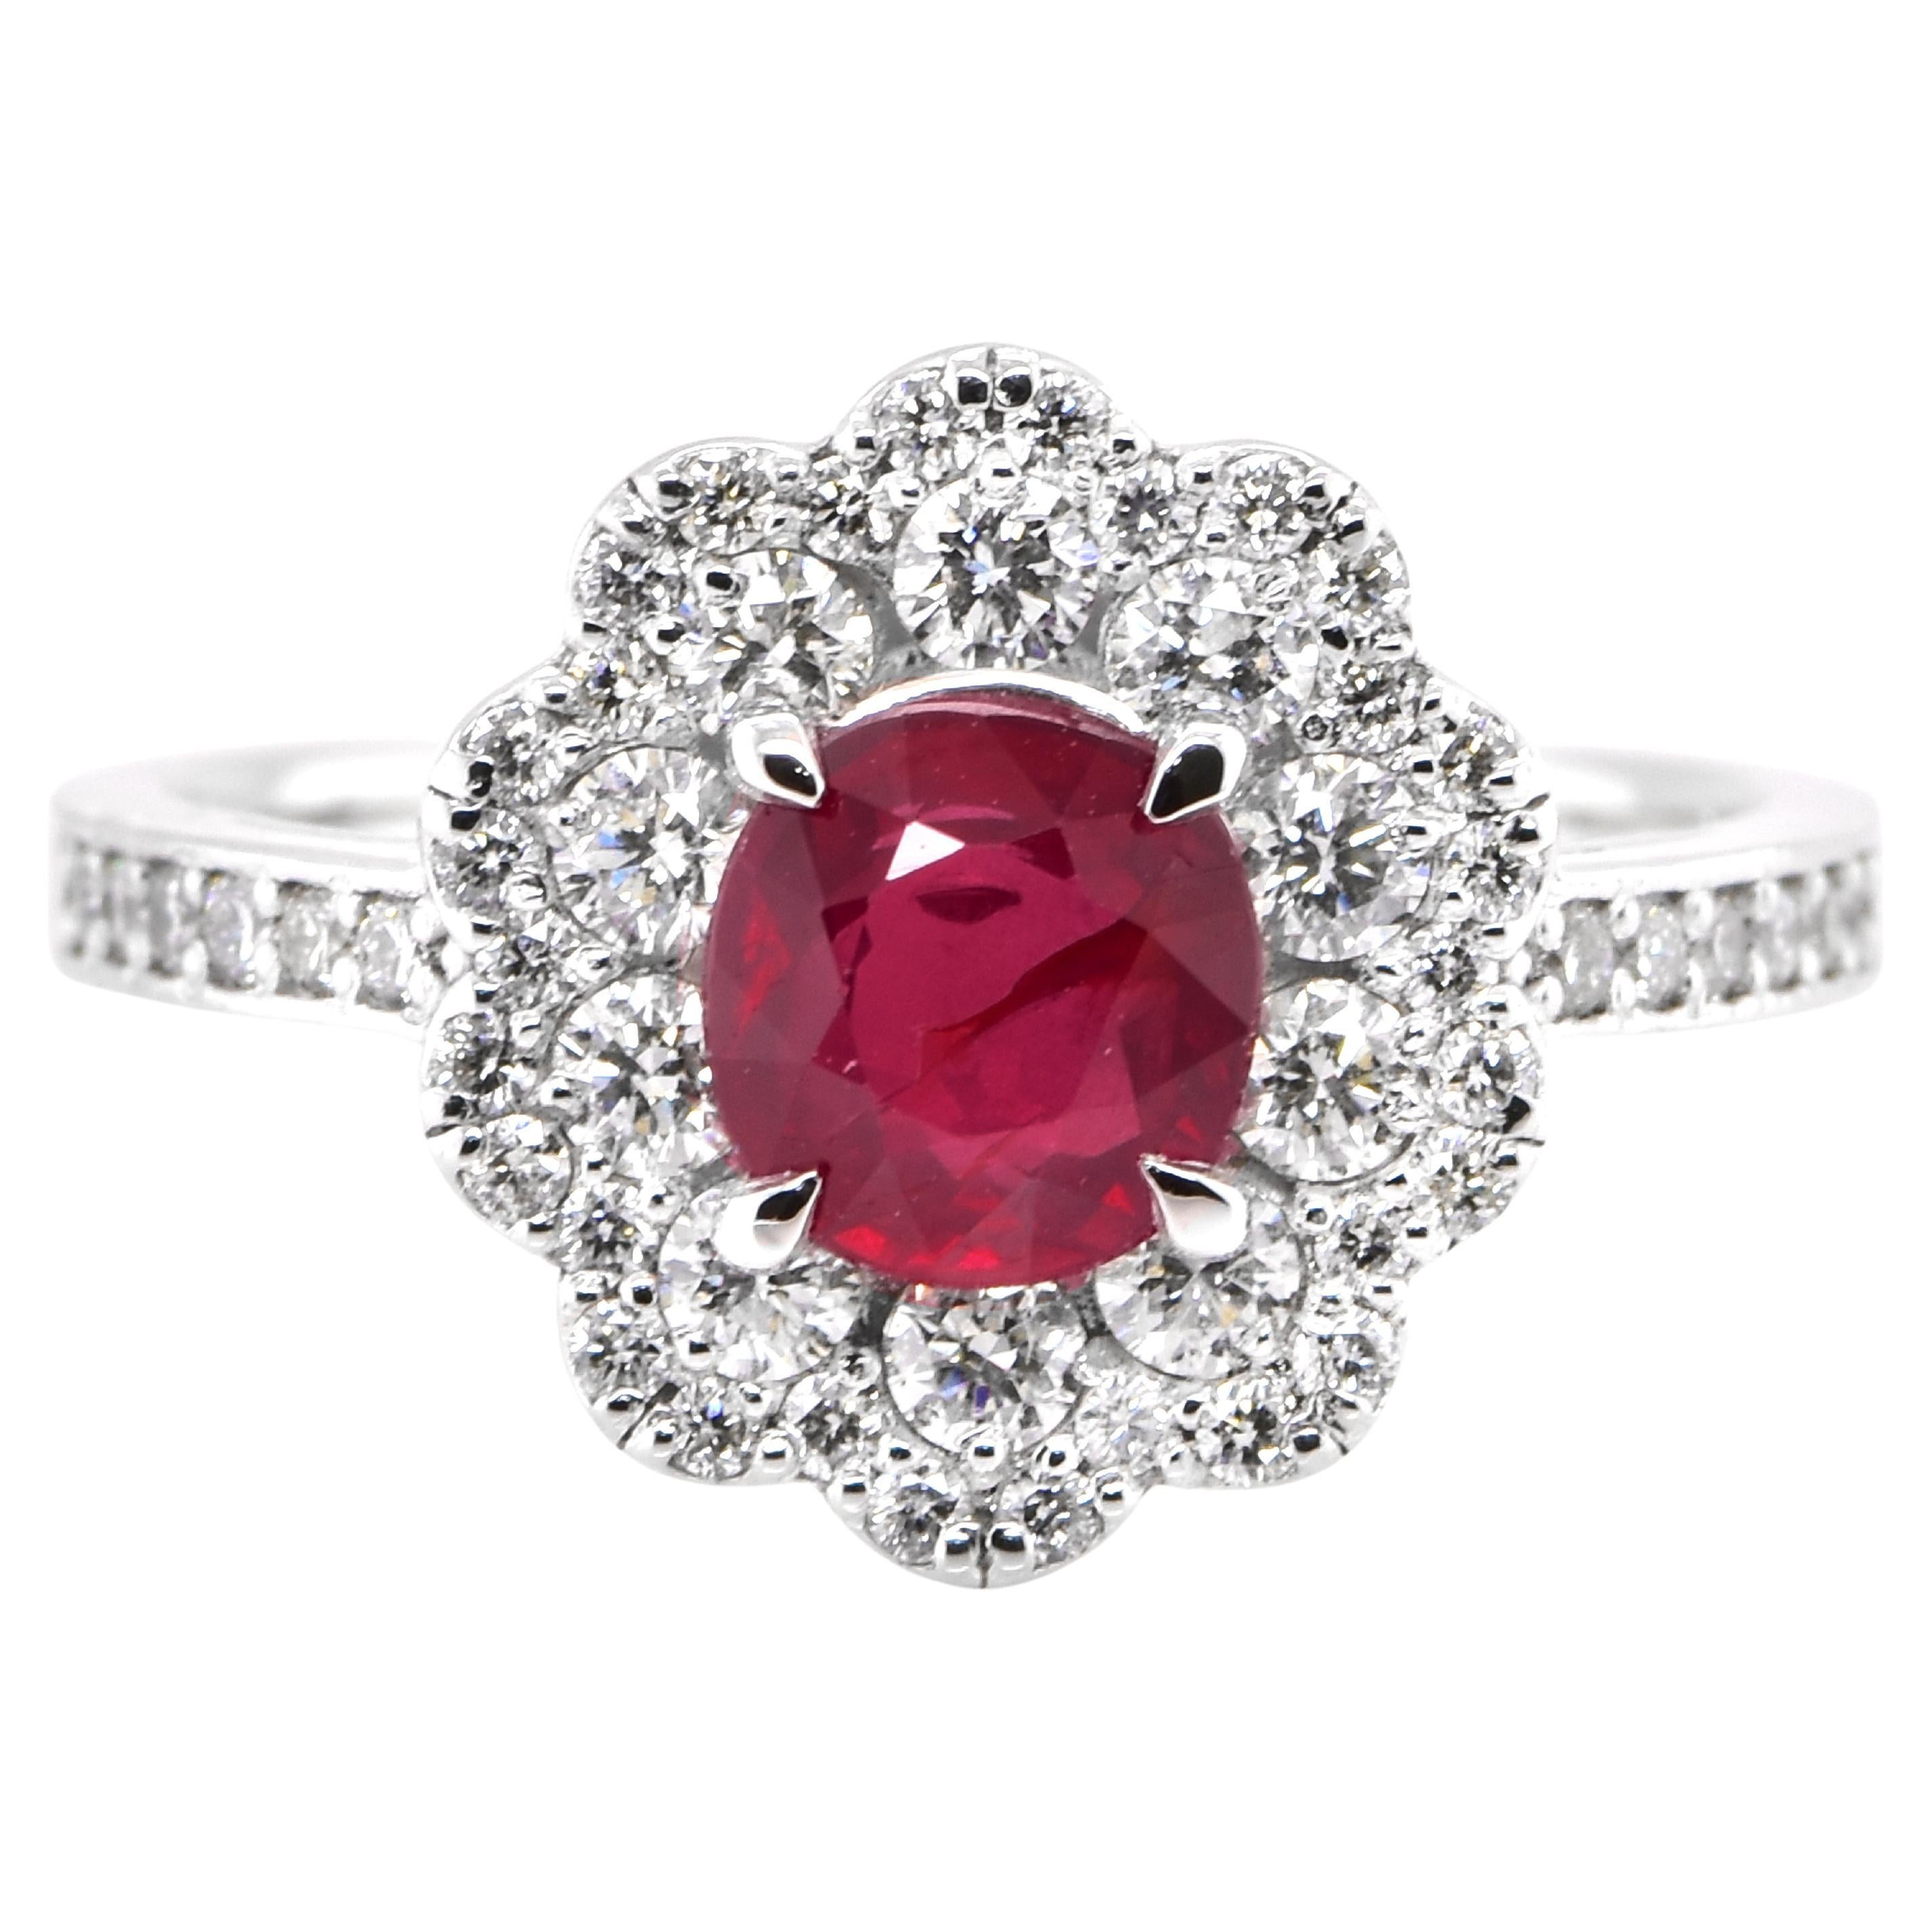 GIA Certified 1.14 Carat Natural, Unheated Ruby and Diamond Ring set in Platinum For Sale